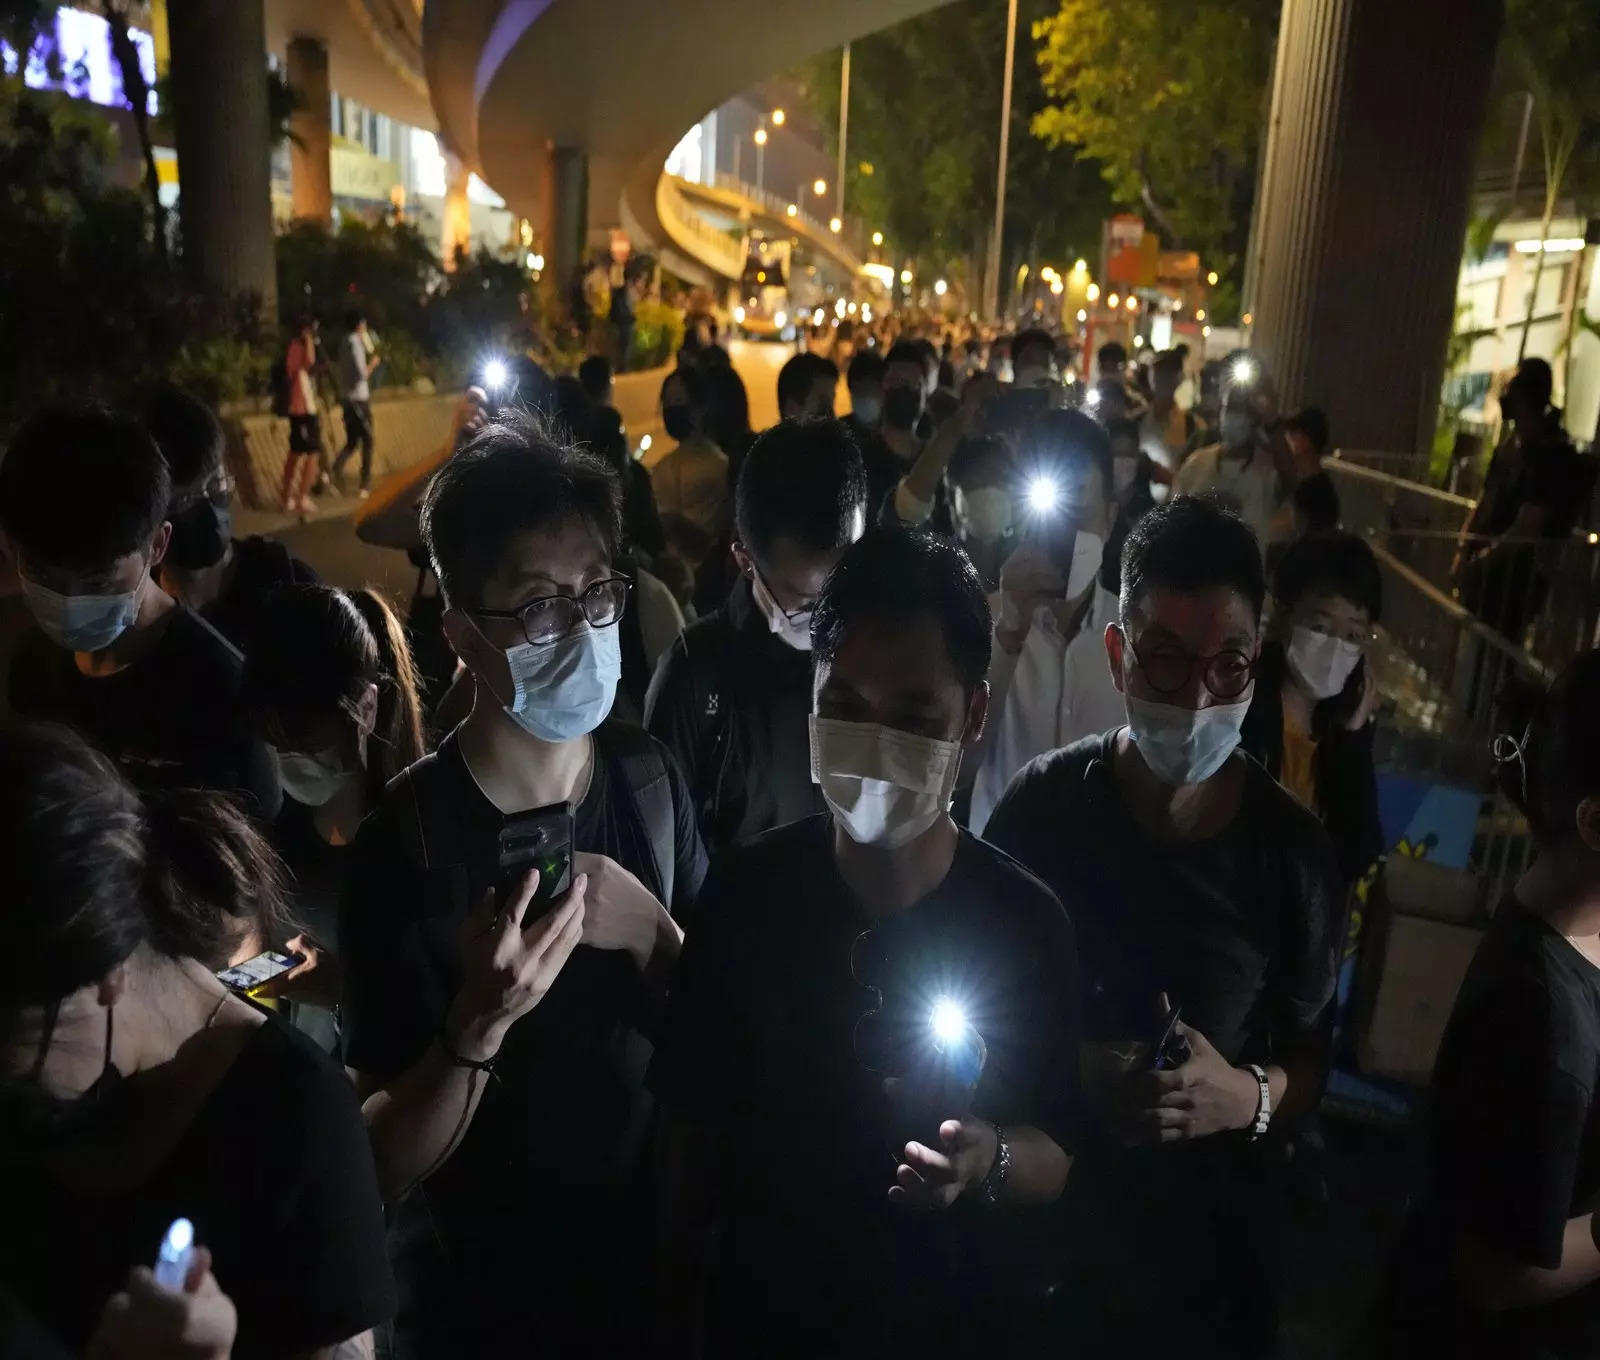 People light LED candles to mark the anniversary of the military crackdown on a pro-democracy student movement in Beijing, outside Victoria Park in Hong Kong. (File photo)